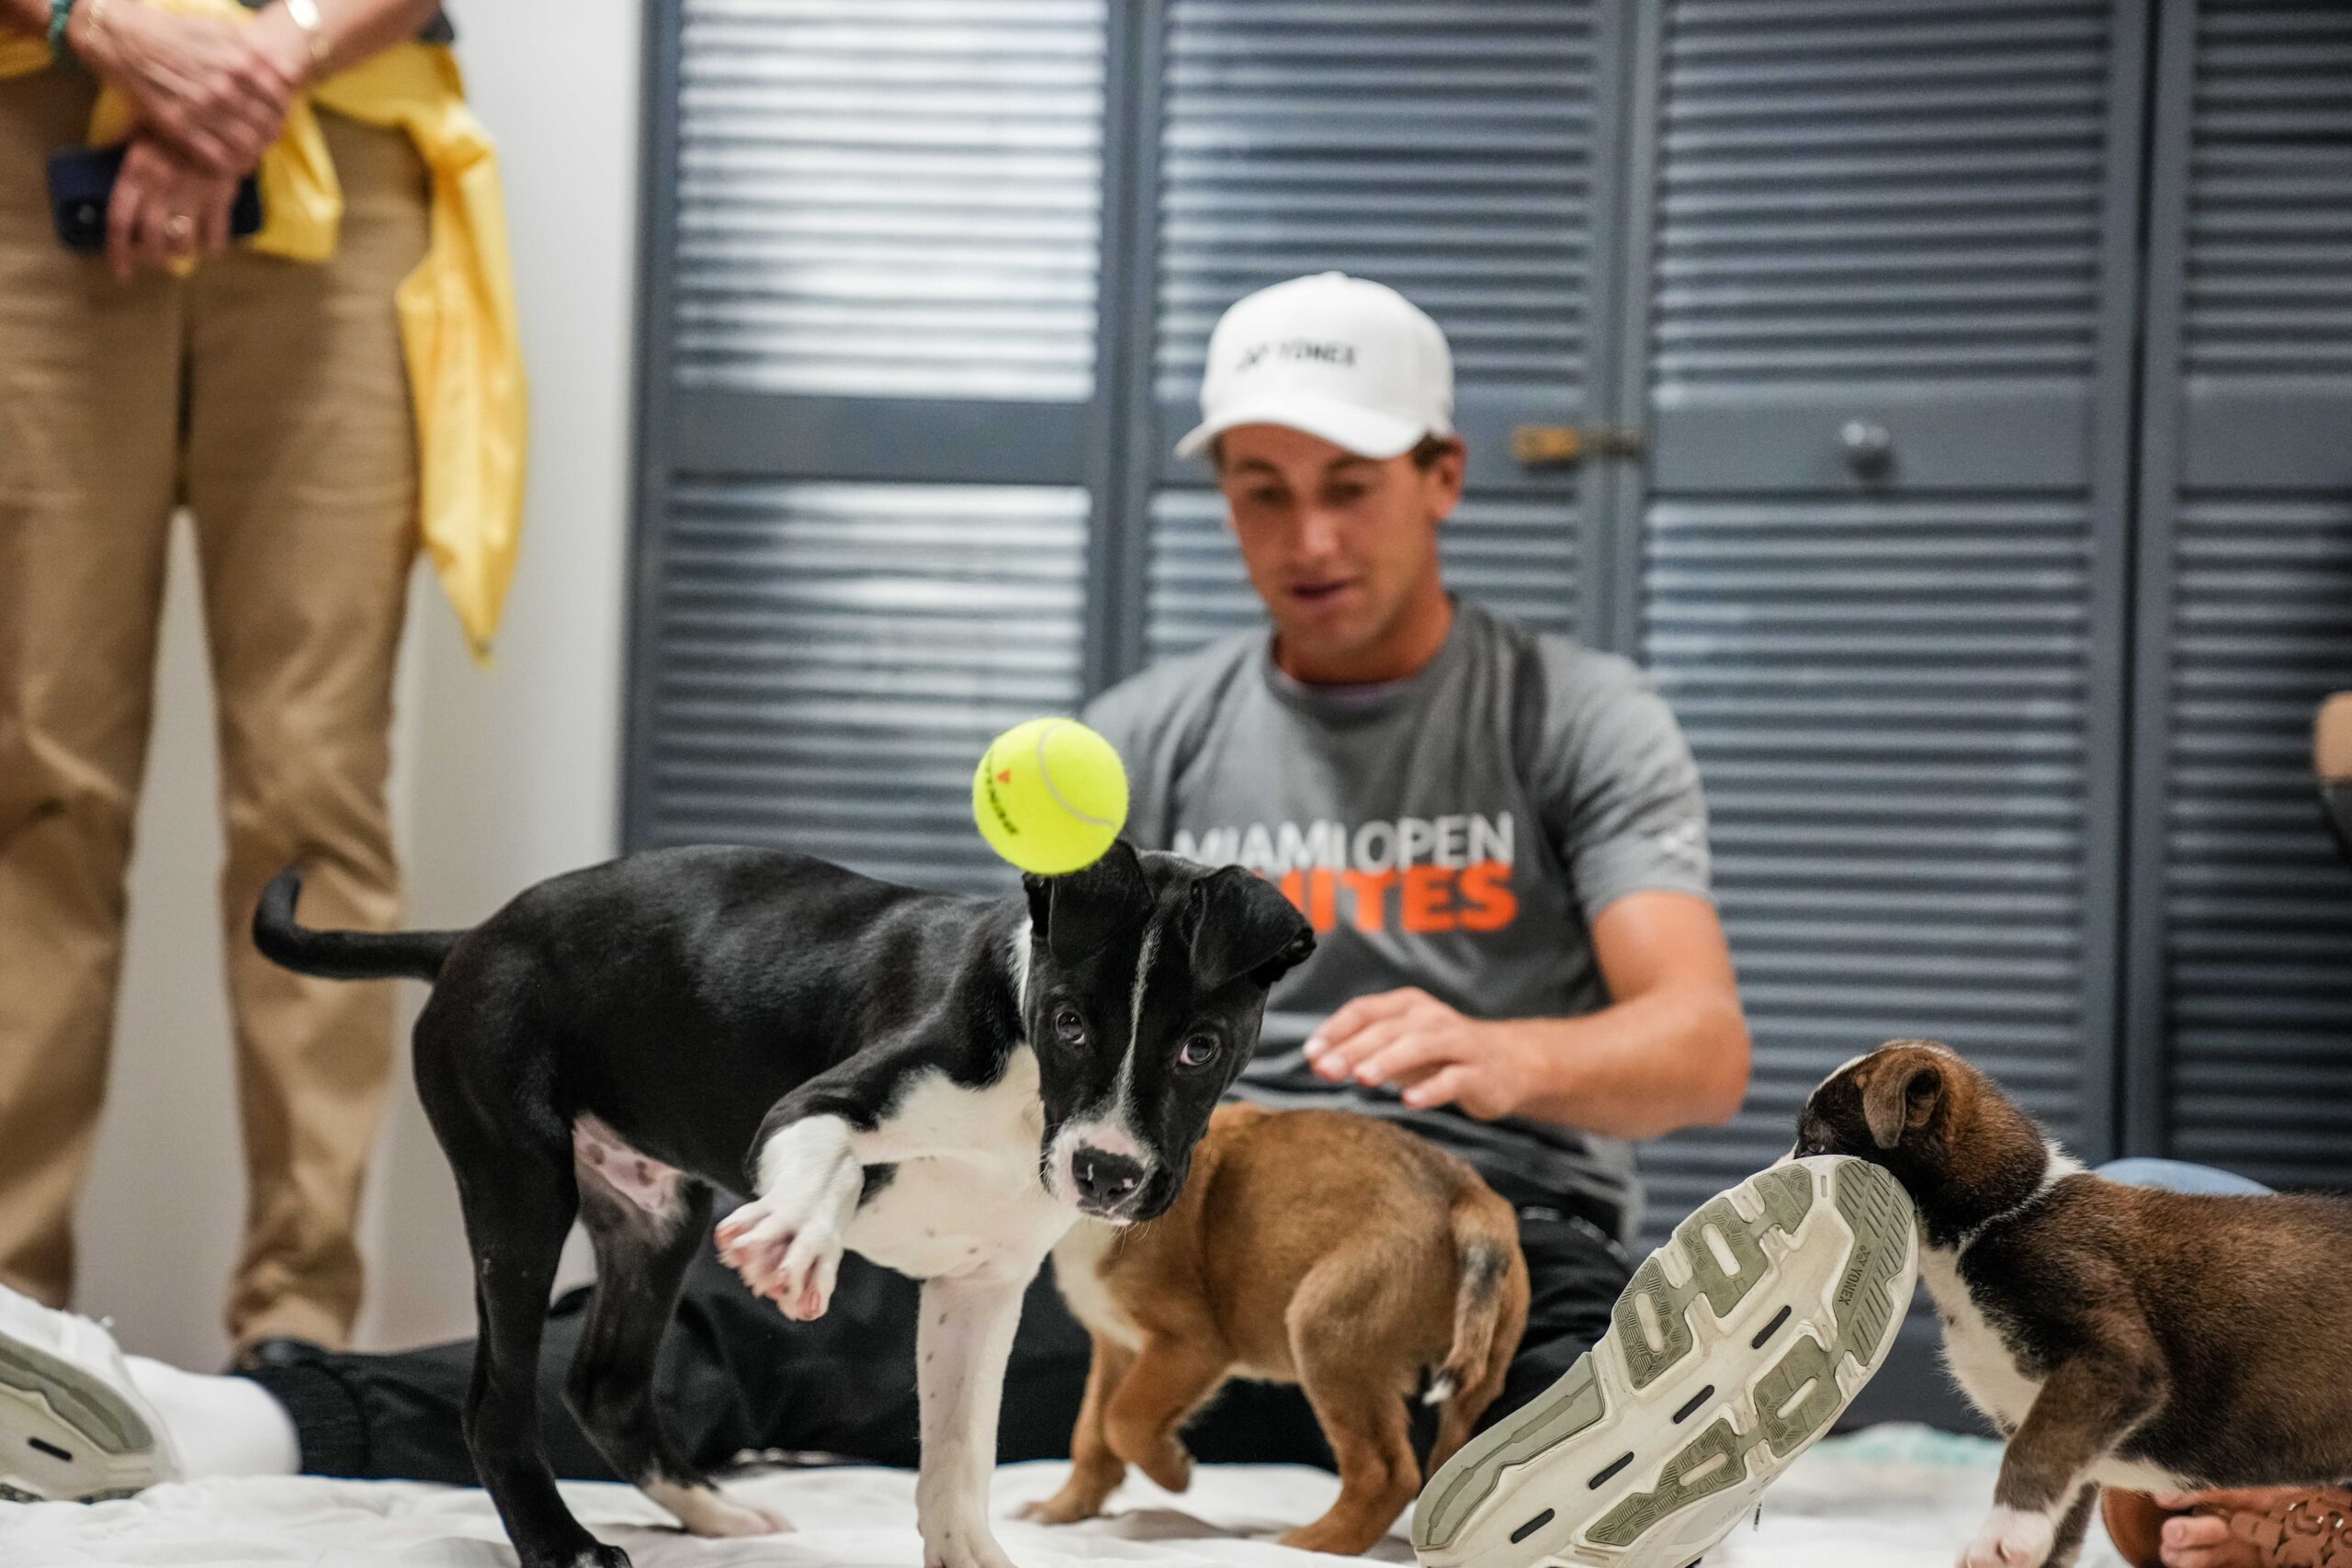 Casper Ruud and puppy playing with a tennis ball during the Miami Open Unites Humane Society event in Miami on March 20, 2023.